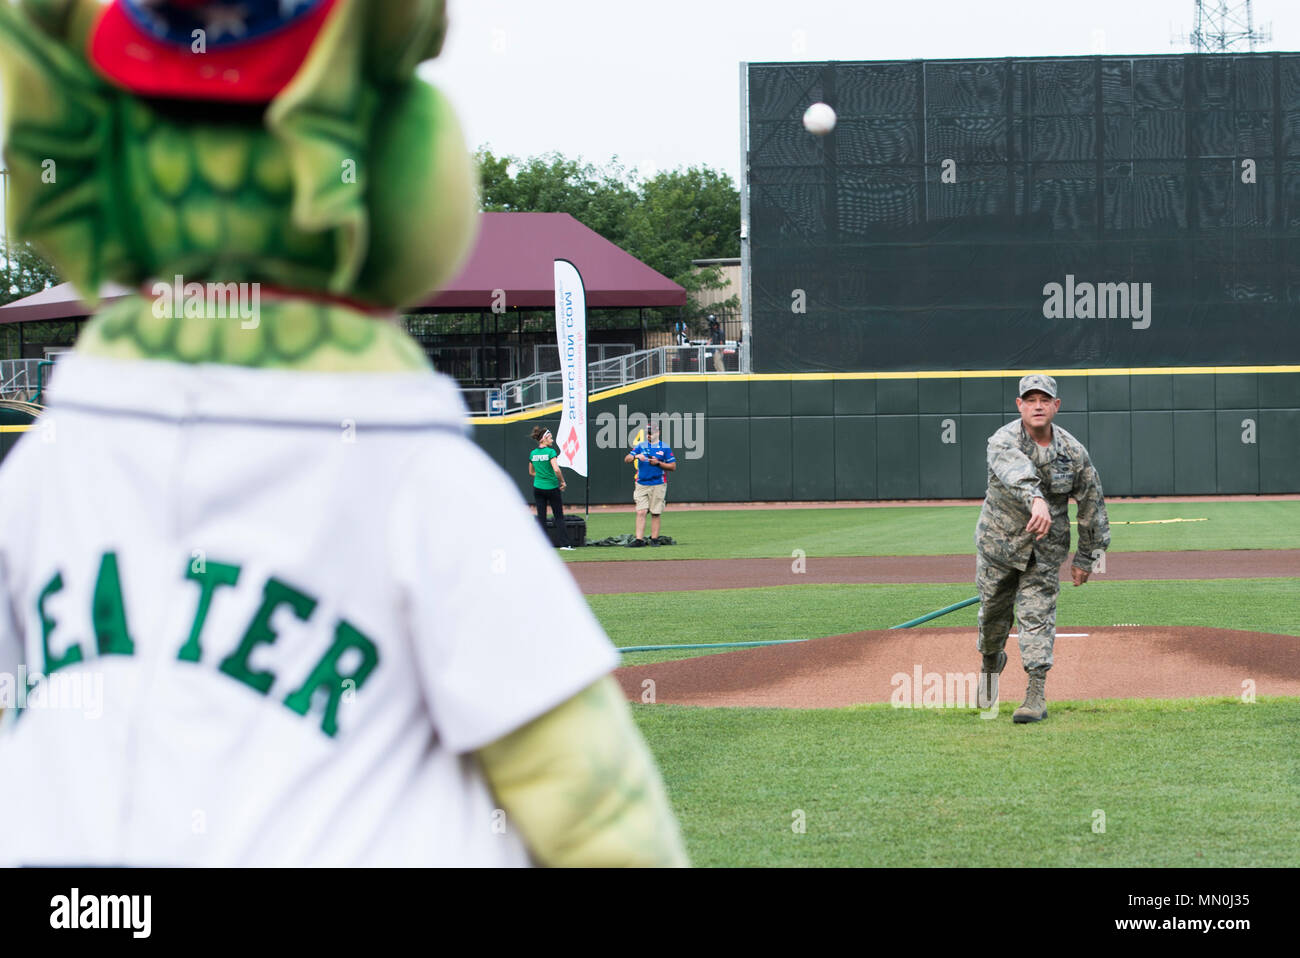 Col. Adam Willis, 445th Airlift Wing commander, throws out the ceremonial first pitch during the Dayton Dragons salute to hometown heroes event at Fifth Third Field in Downtown Dayton, Aug. 5, 2017. The Dayton Dragons took on the Lansing Lugnuts losing the game with a score of 4-1.  (U.S. Air Force photo/ Wesley Farnsworth) Stock Photo